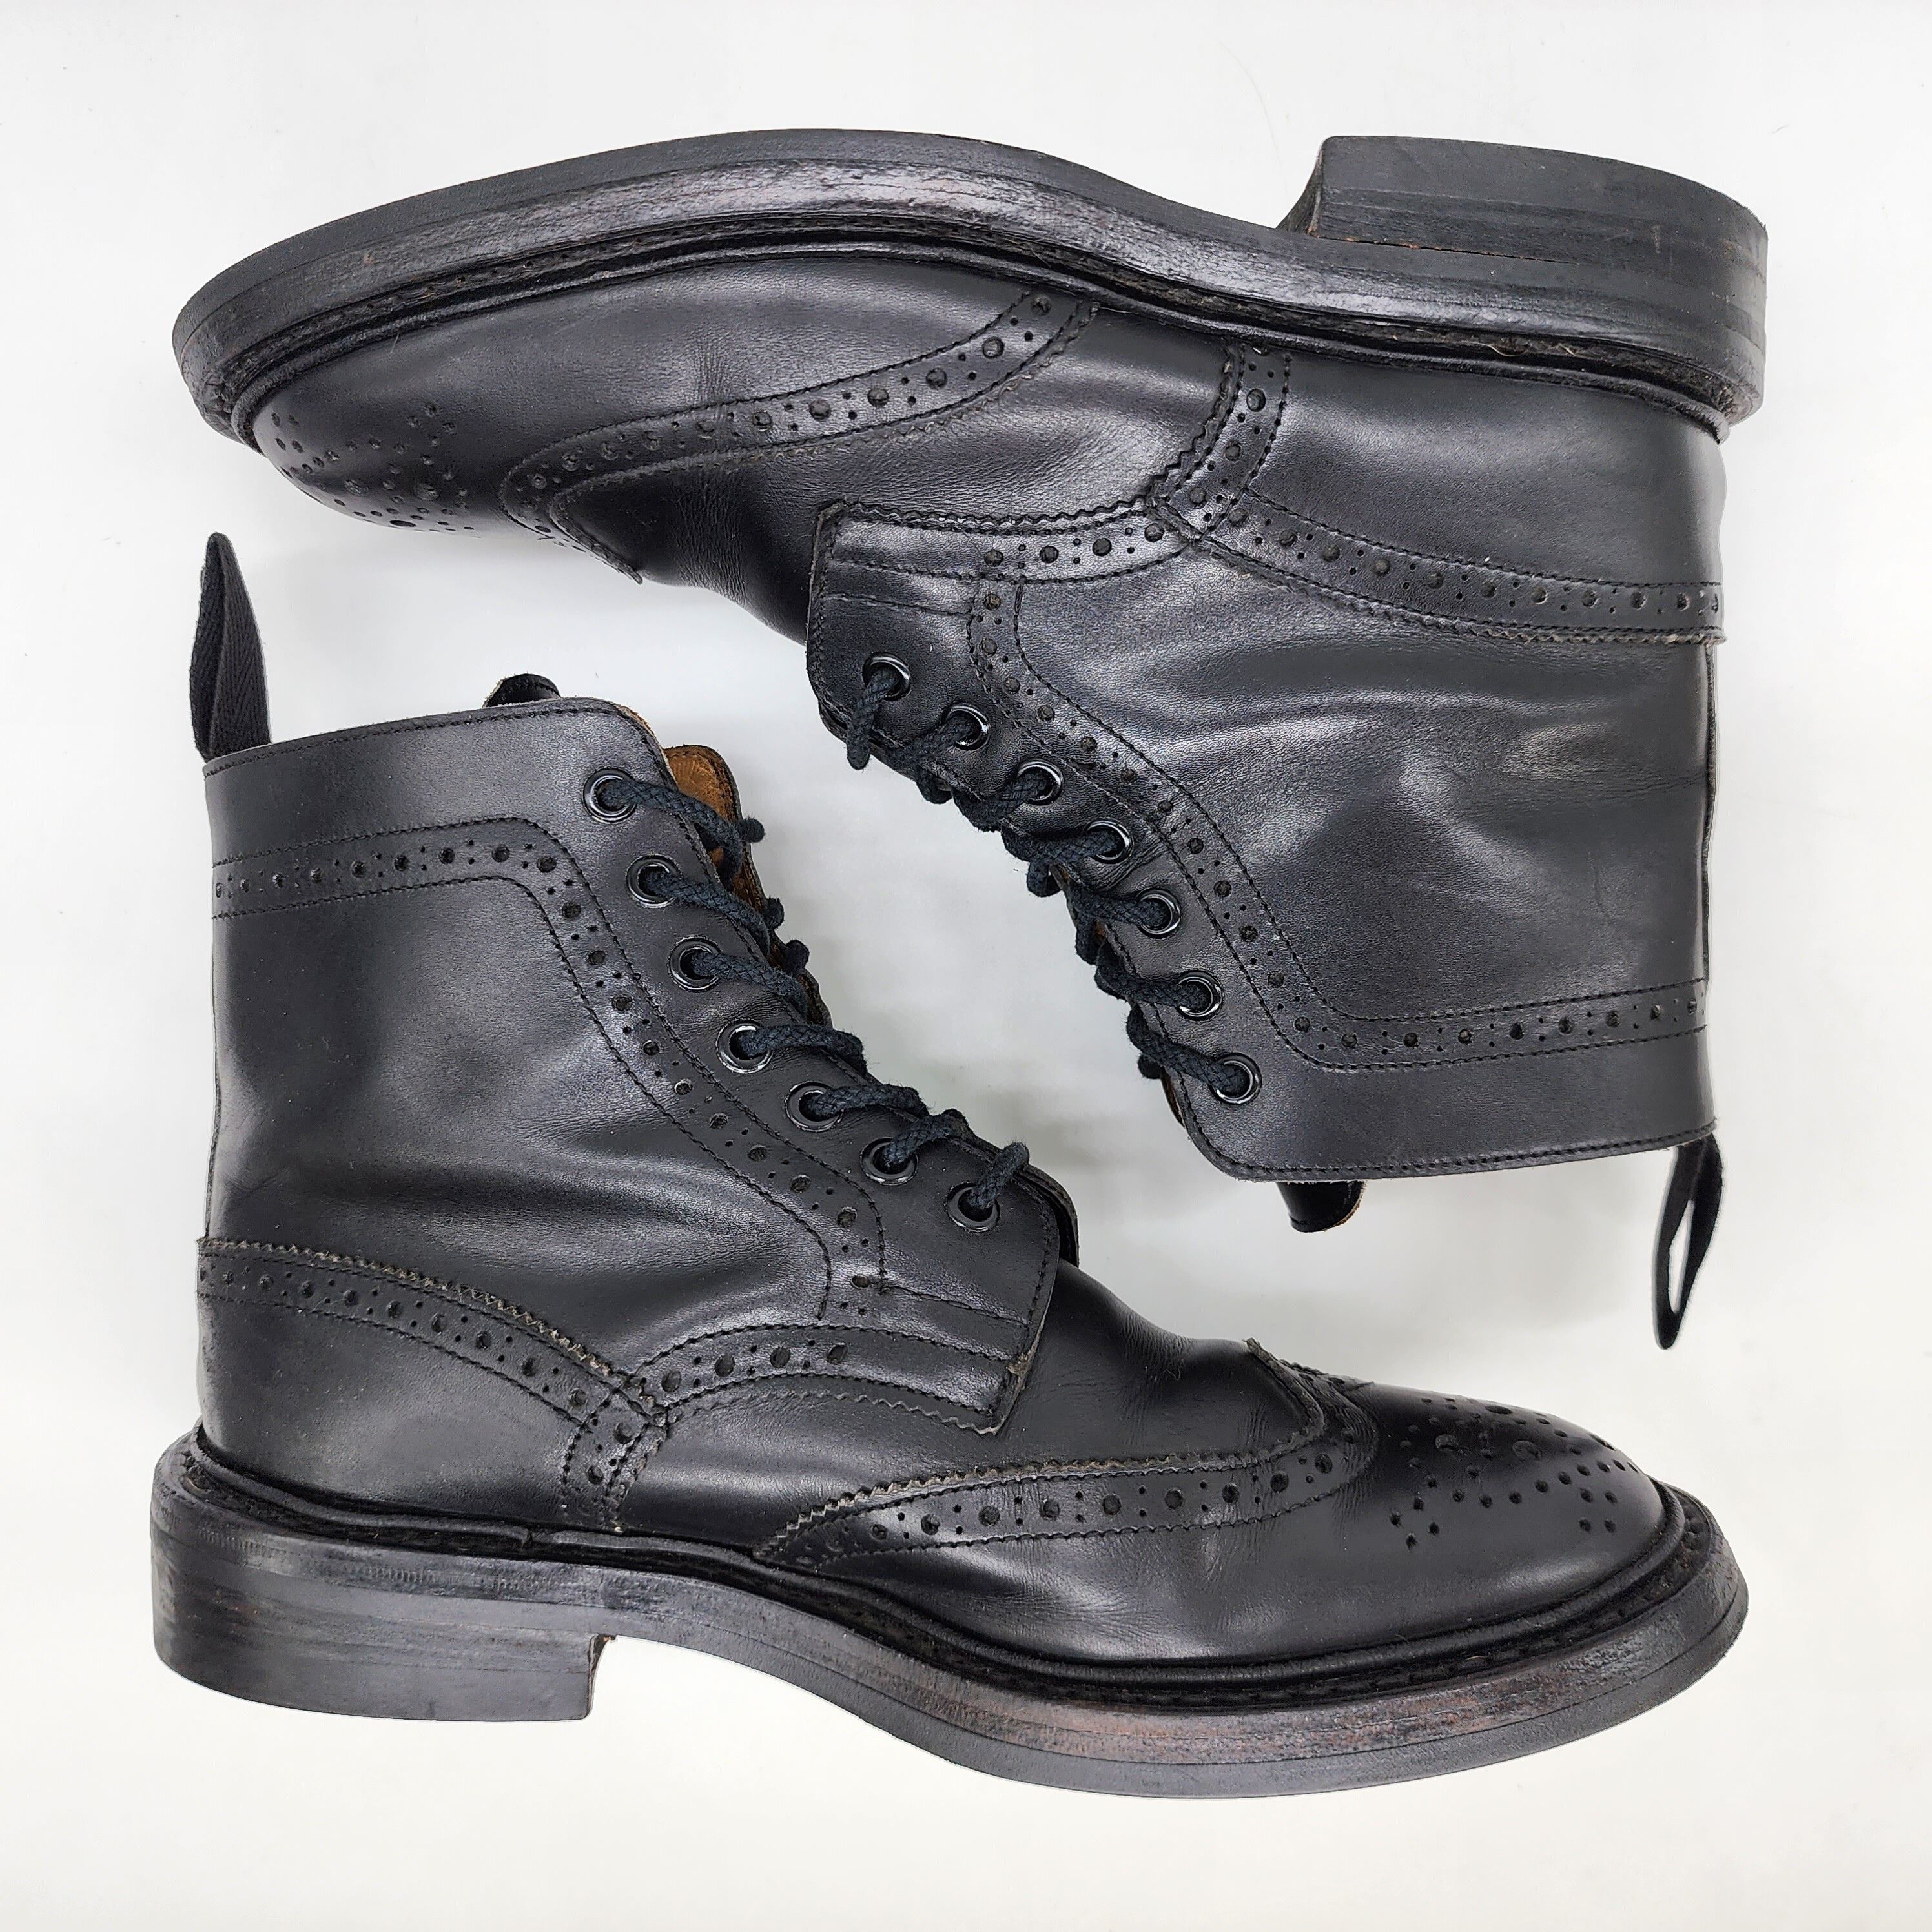 Trickers - Stow Boots - Black - 8